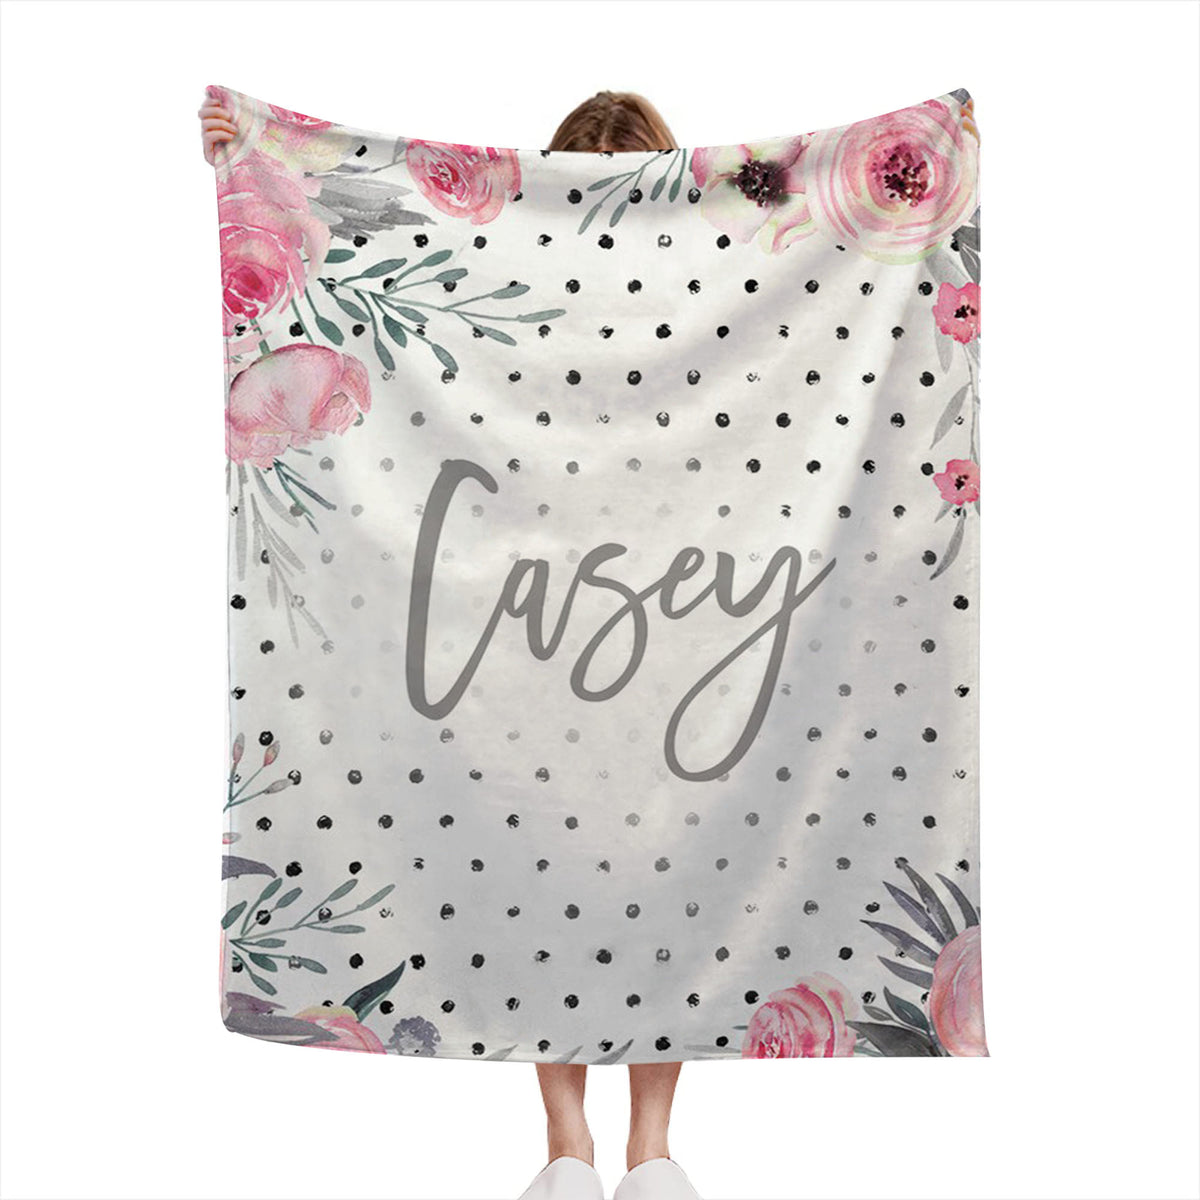 Personalized Floral Dot Blanket With Name For Adult, Kids